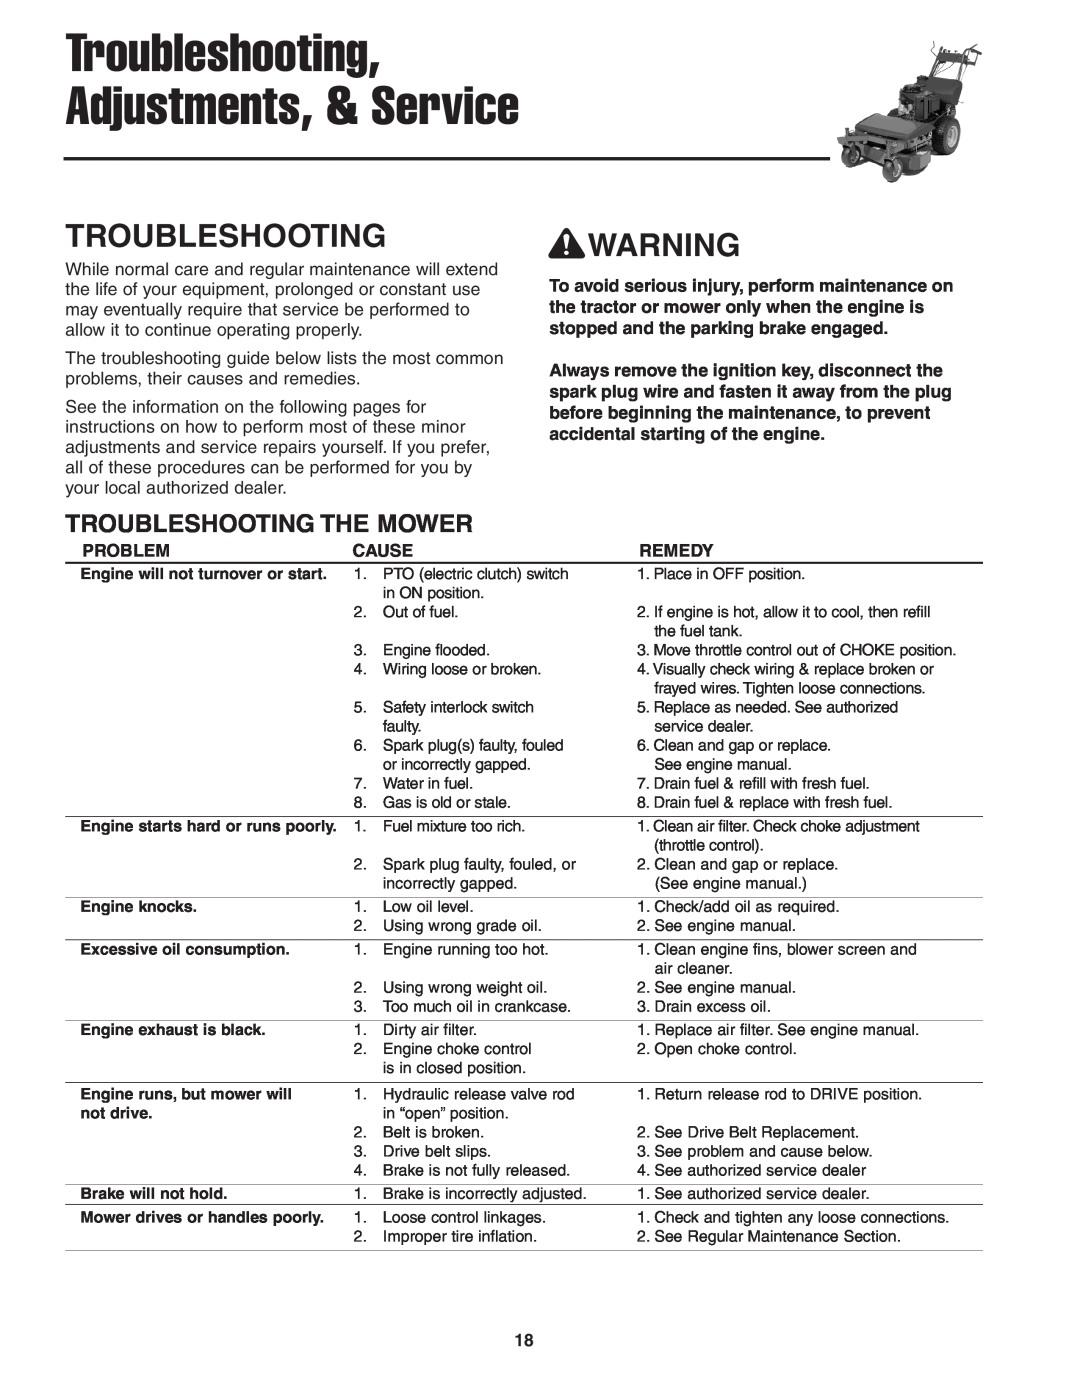 Snapper 13HP manual Troubleshooting The Mower, Troubleshooting, Adjustments, & Service 